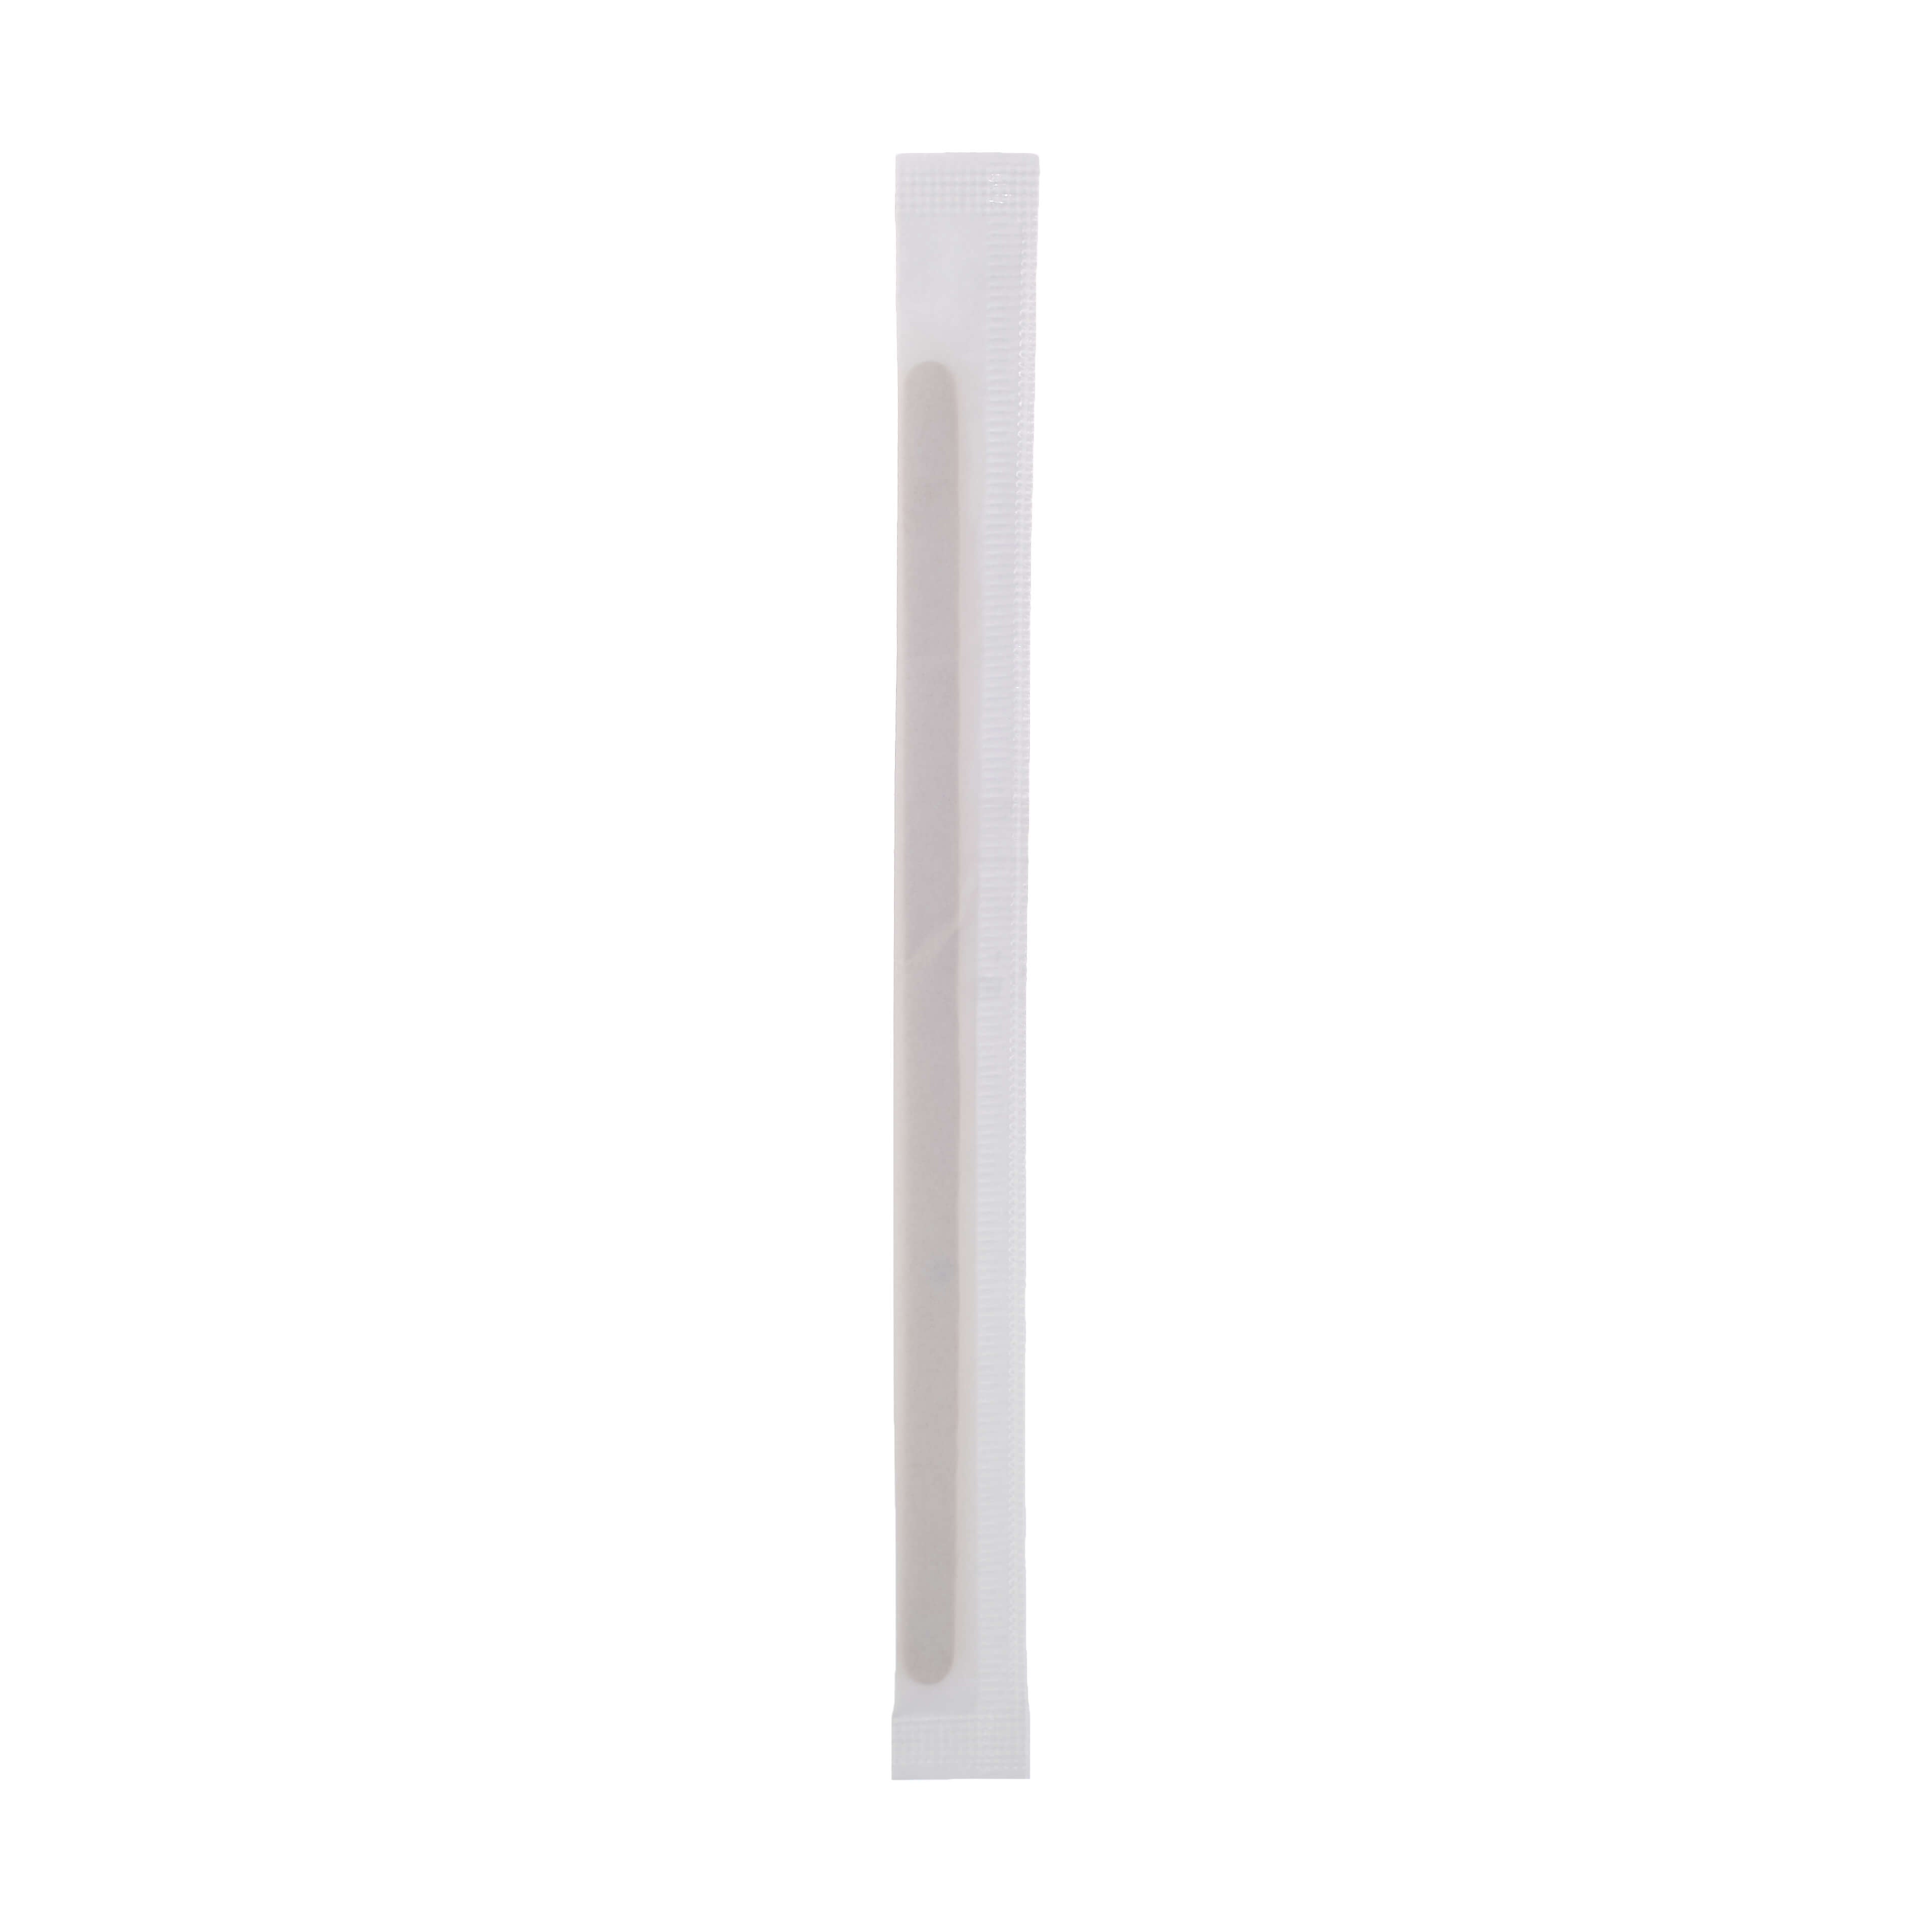 14 cm DISPOSABLE WOODEN WRAPPED COFFEE STIRRER 5000 Pieces - Hotpack Global